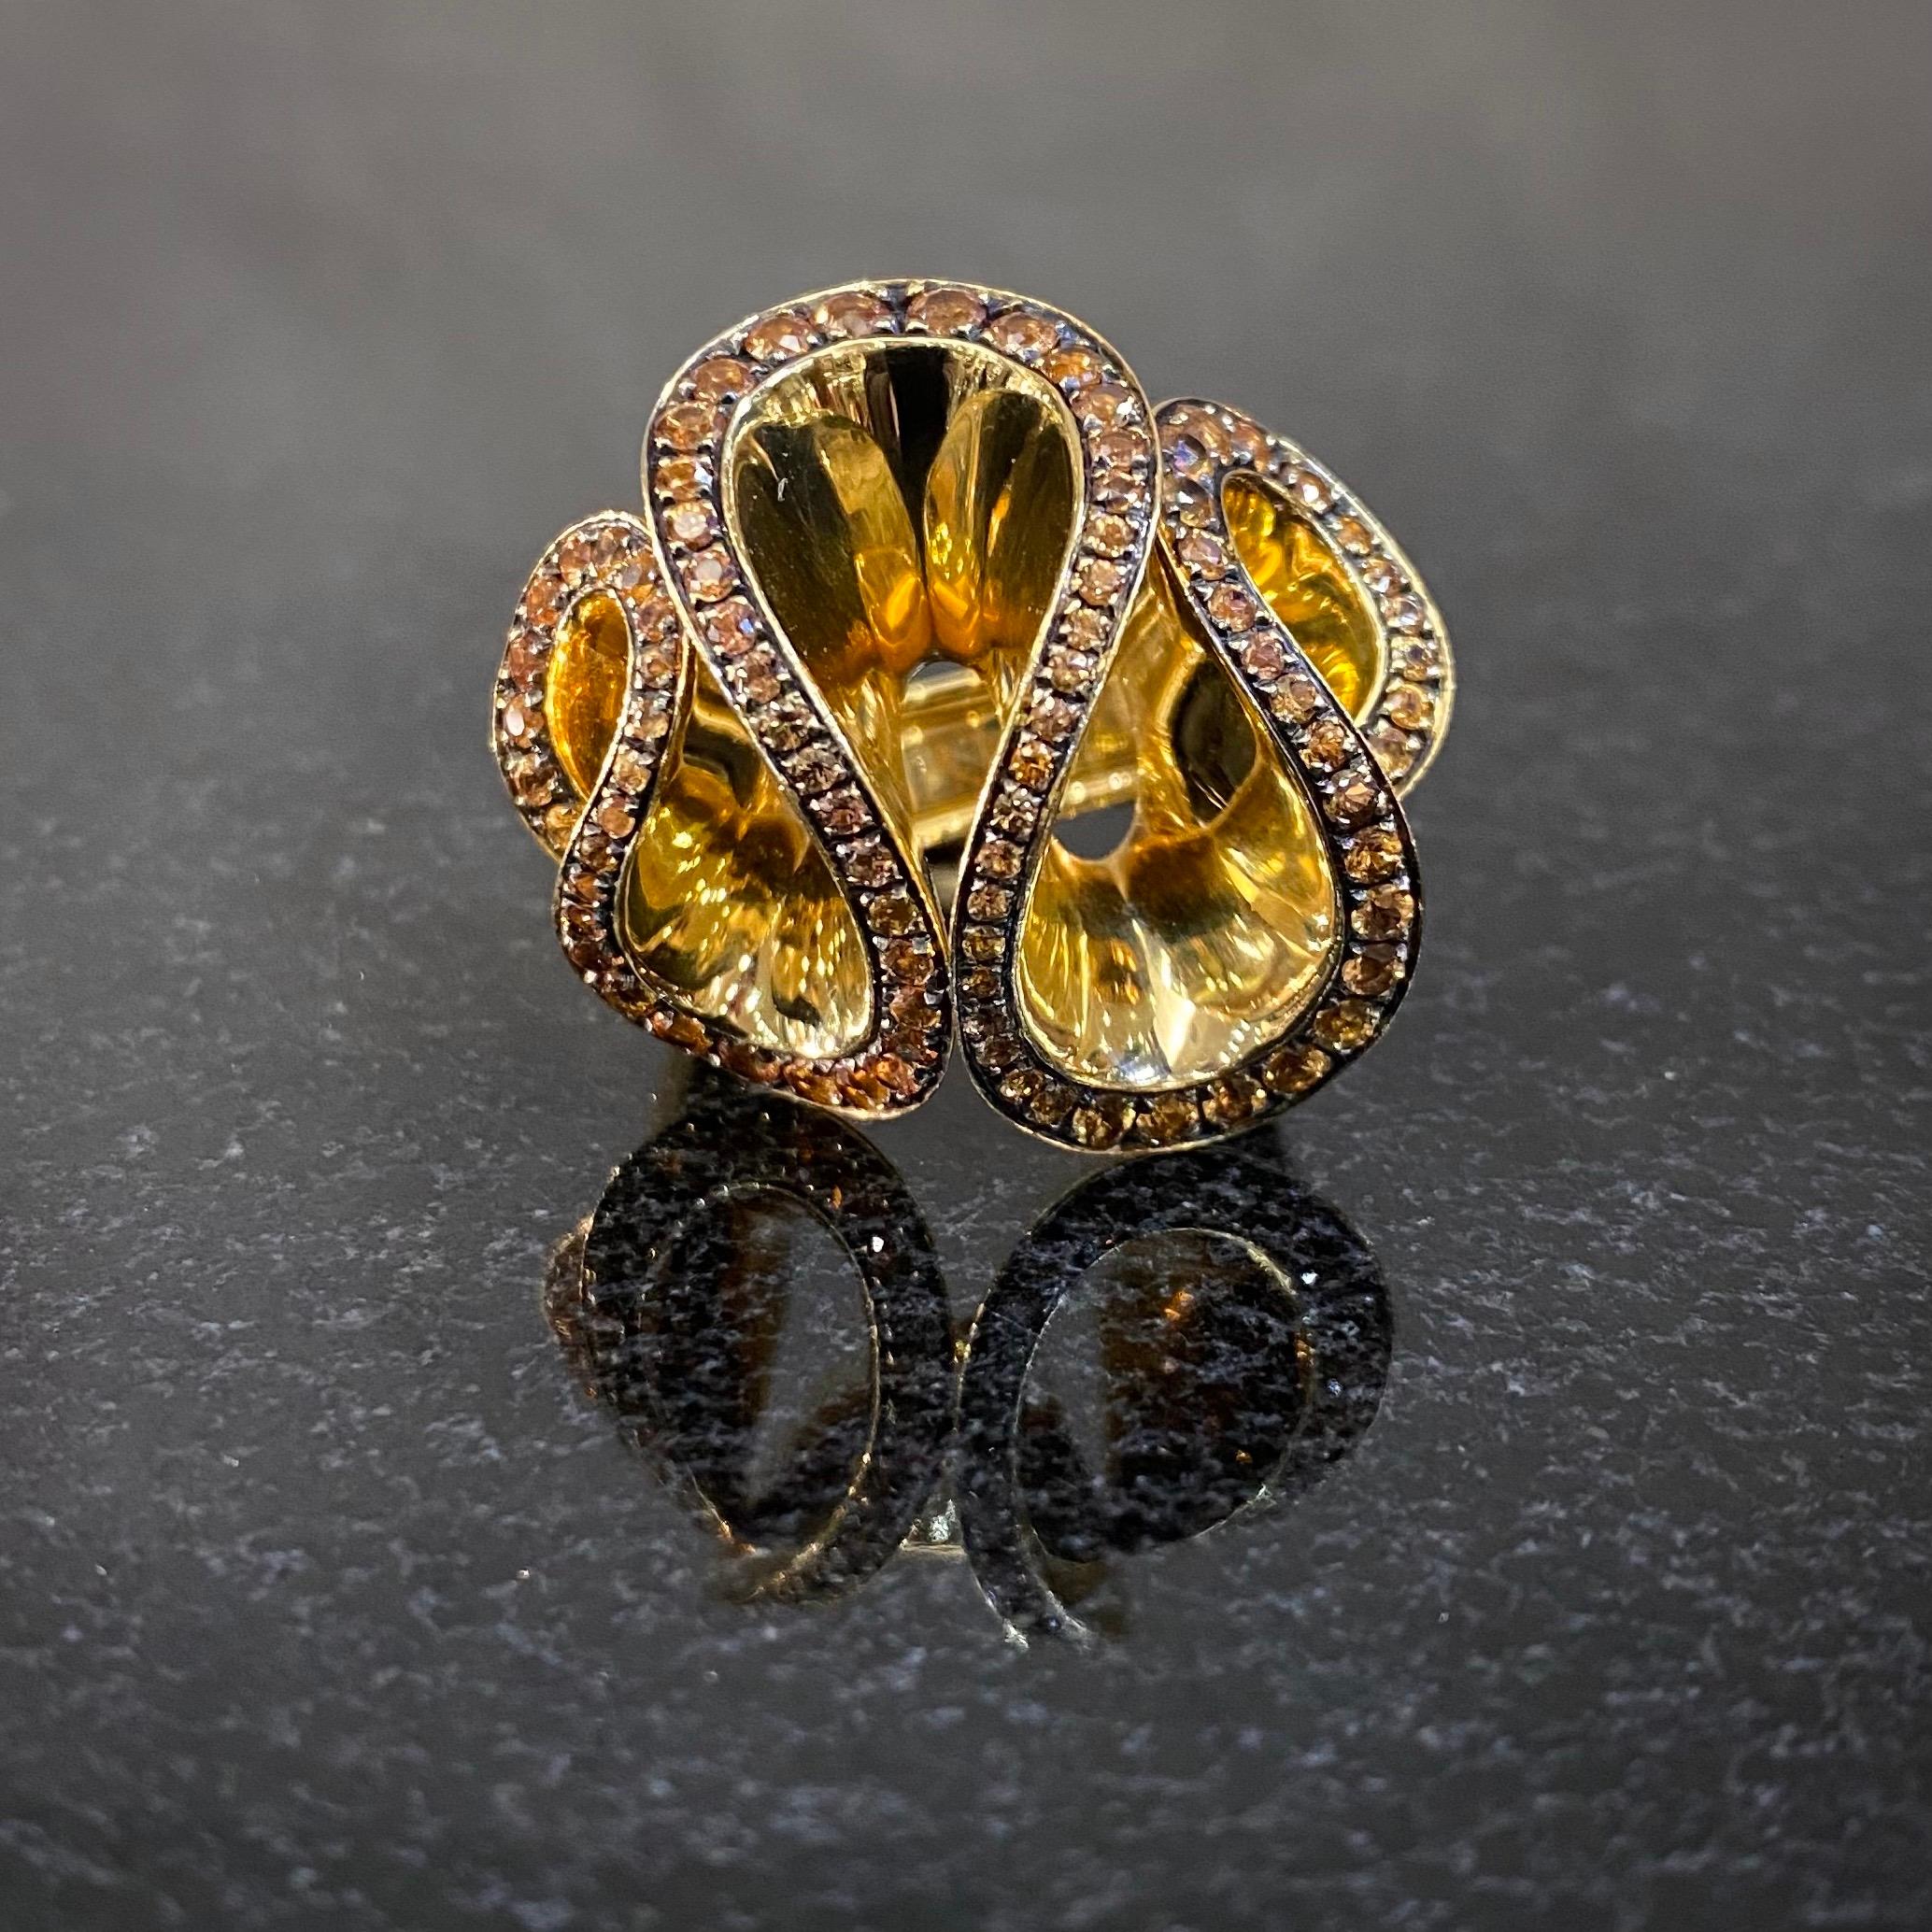 de GRISOGONO round-shape fancy-colored sapphire abstract cocktail ring in 18kt yellow gold, circa 2000. From the brand’s Zingana collection, this scrolled openwork ring of a three-dimensional serpentine shape in polished yellow gold is grain-set to